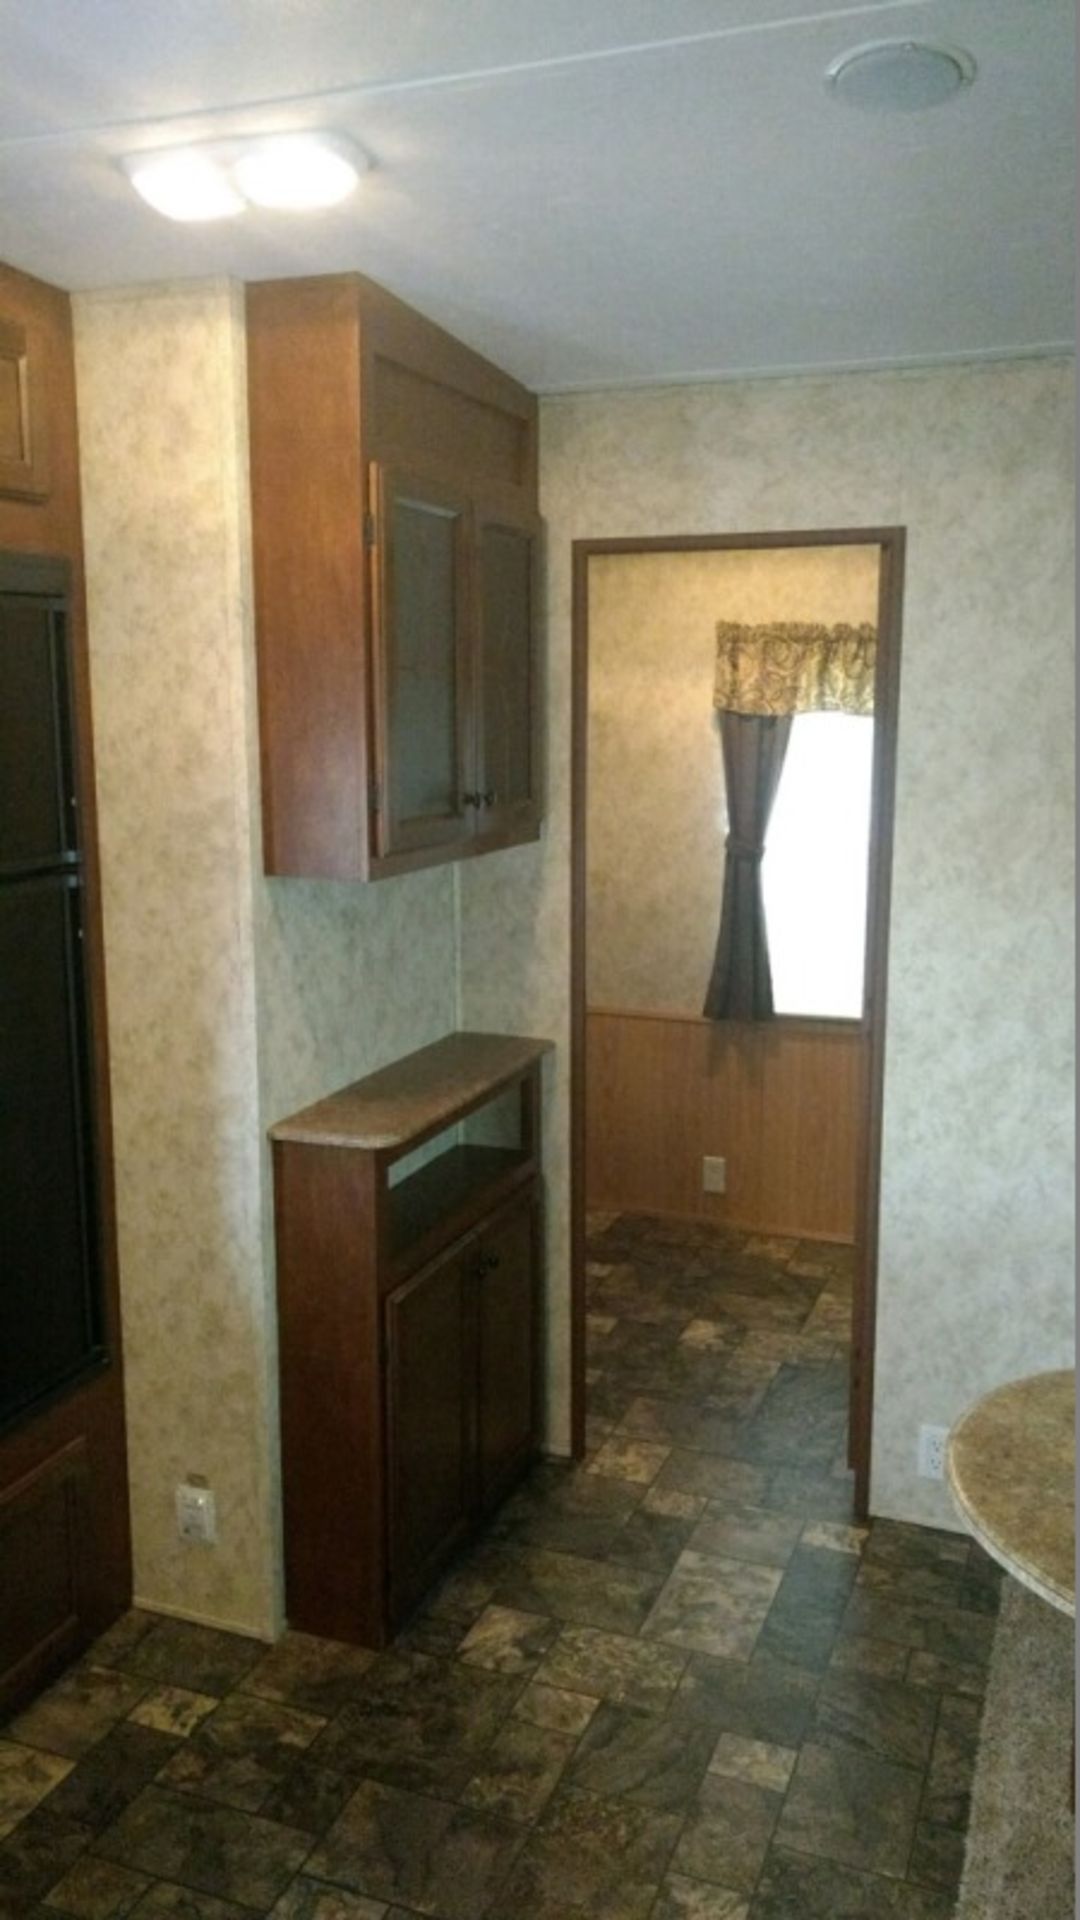 *2012 Coachman Chaparral Open Trail Camper - Image 10 of 14